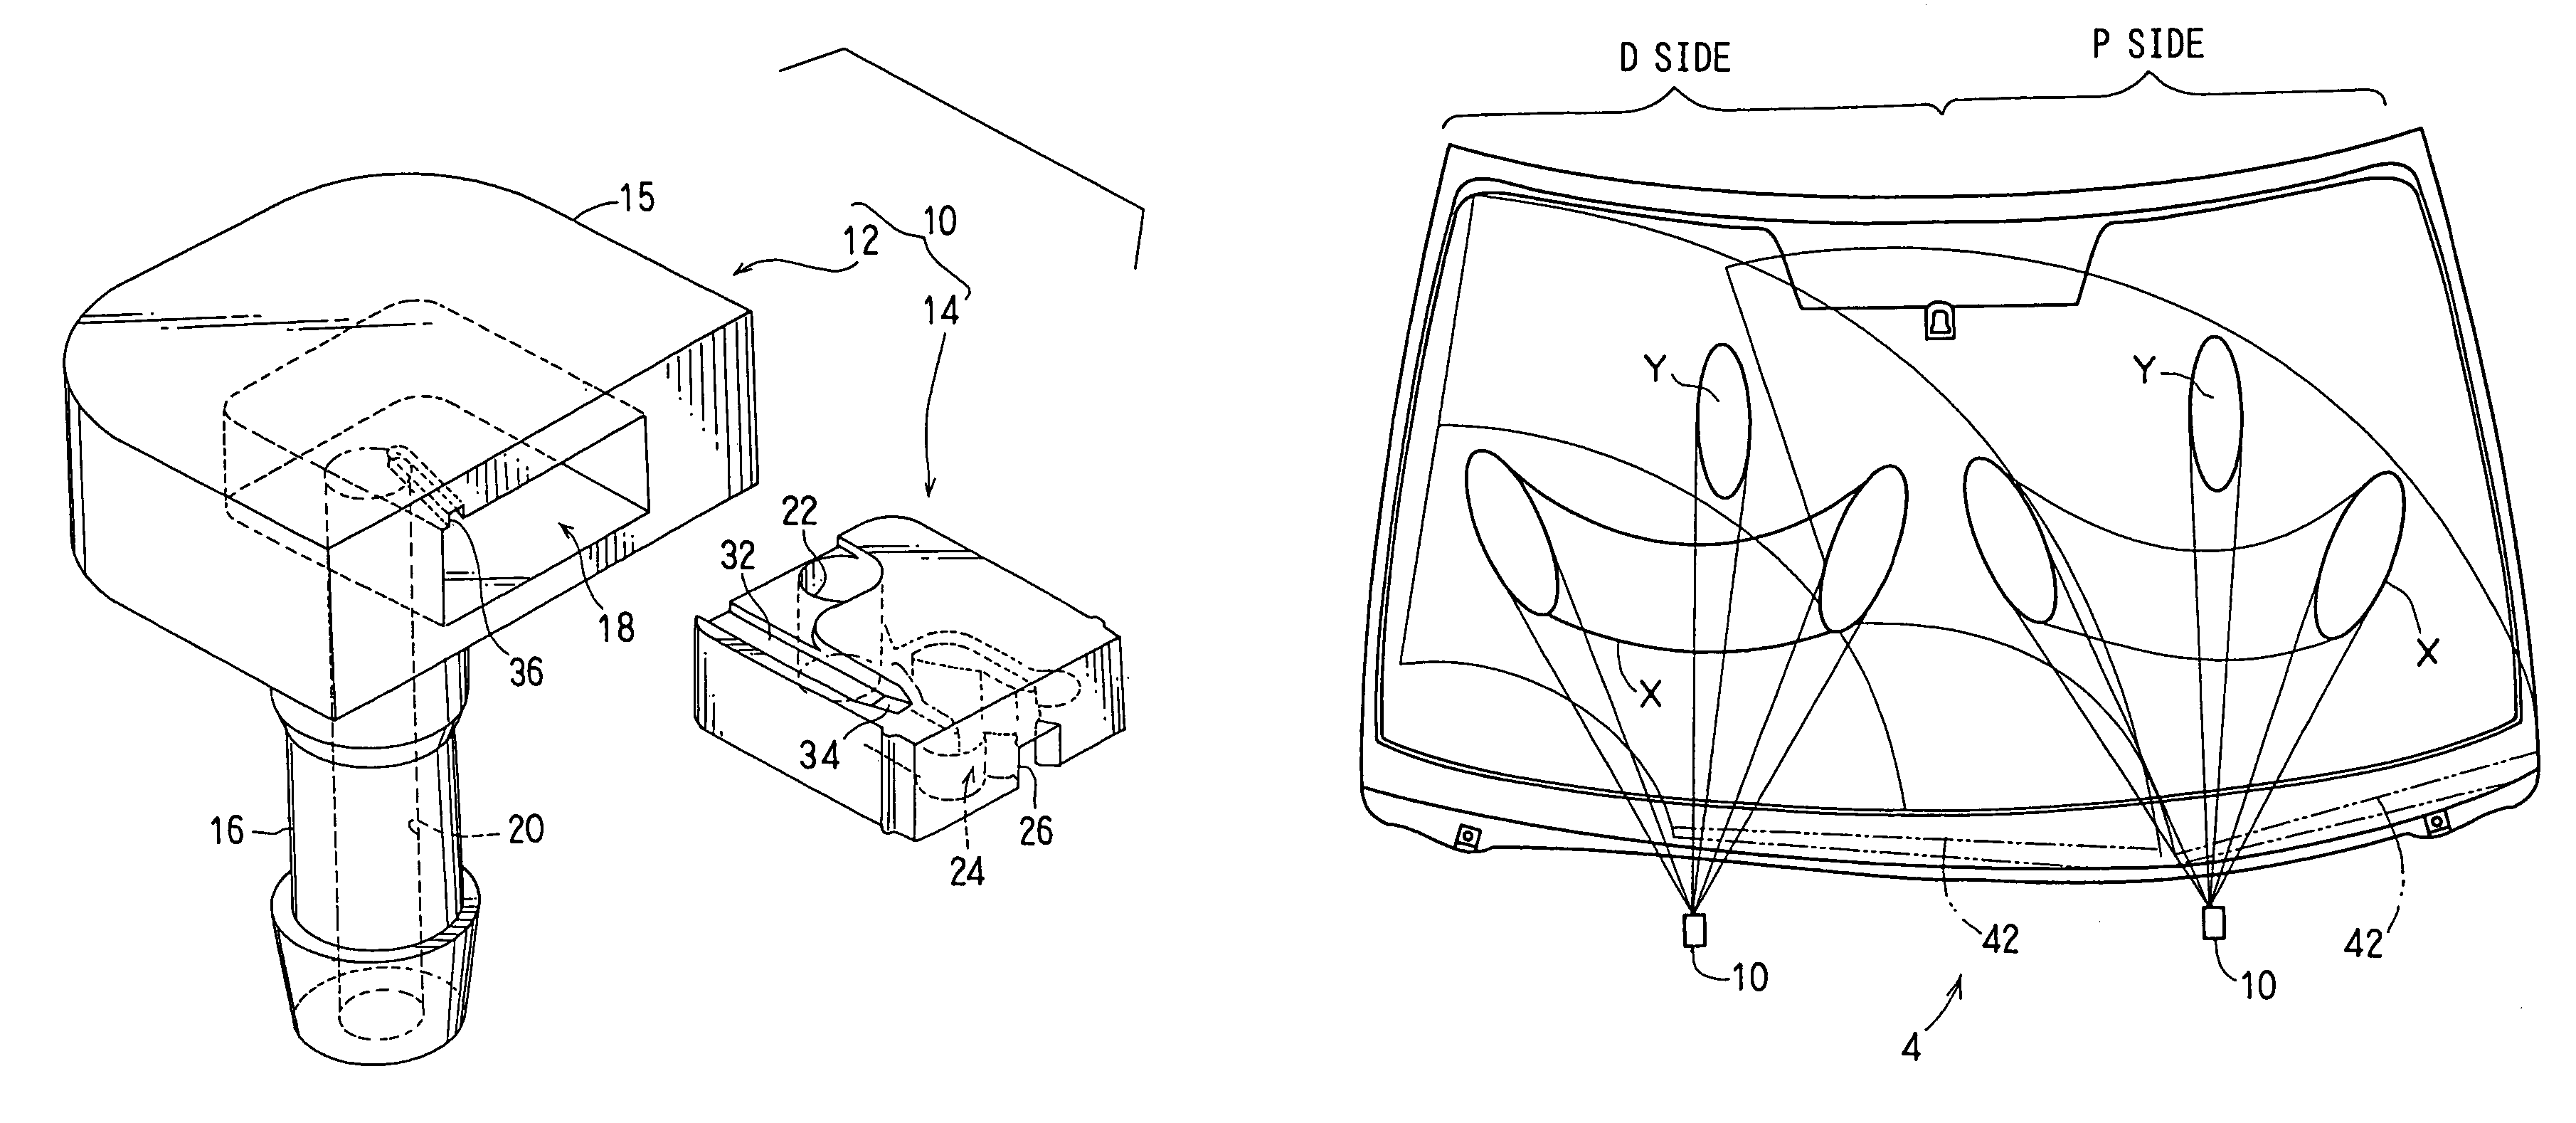 Washer nozzle and washer apparatus